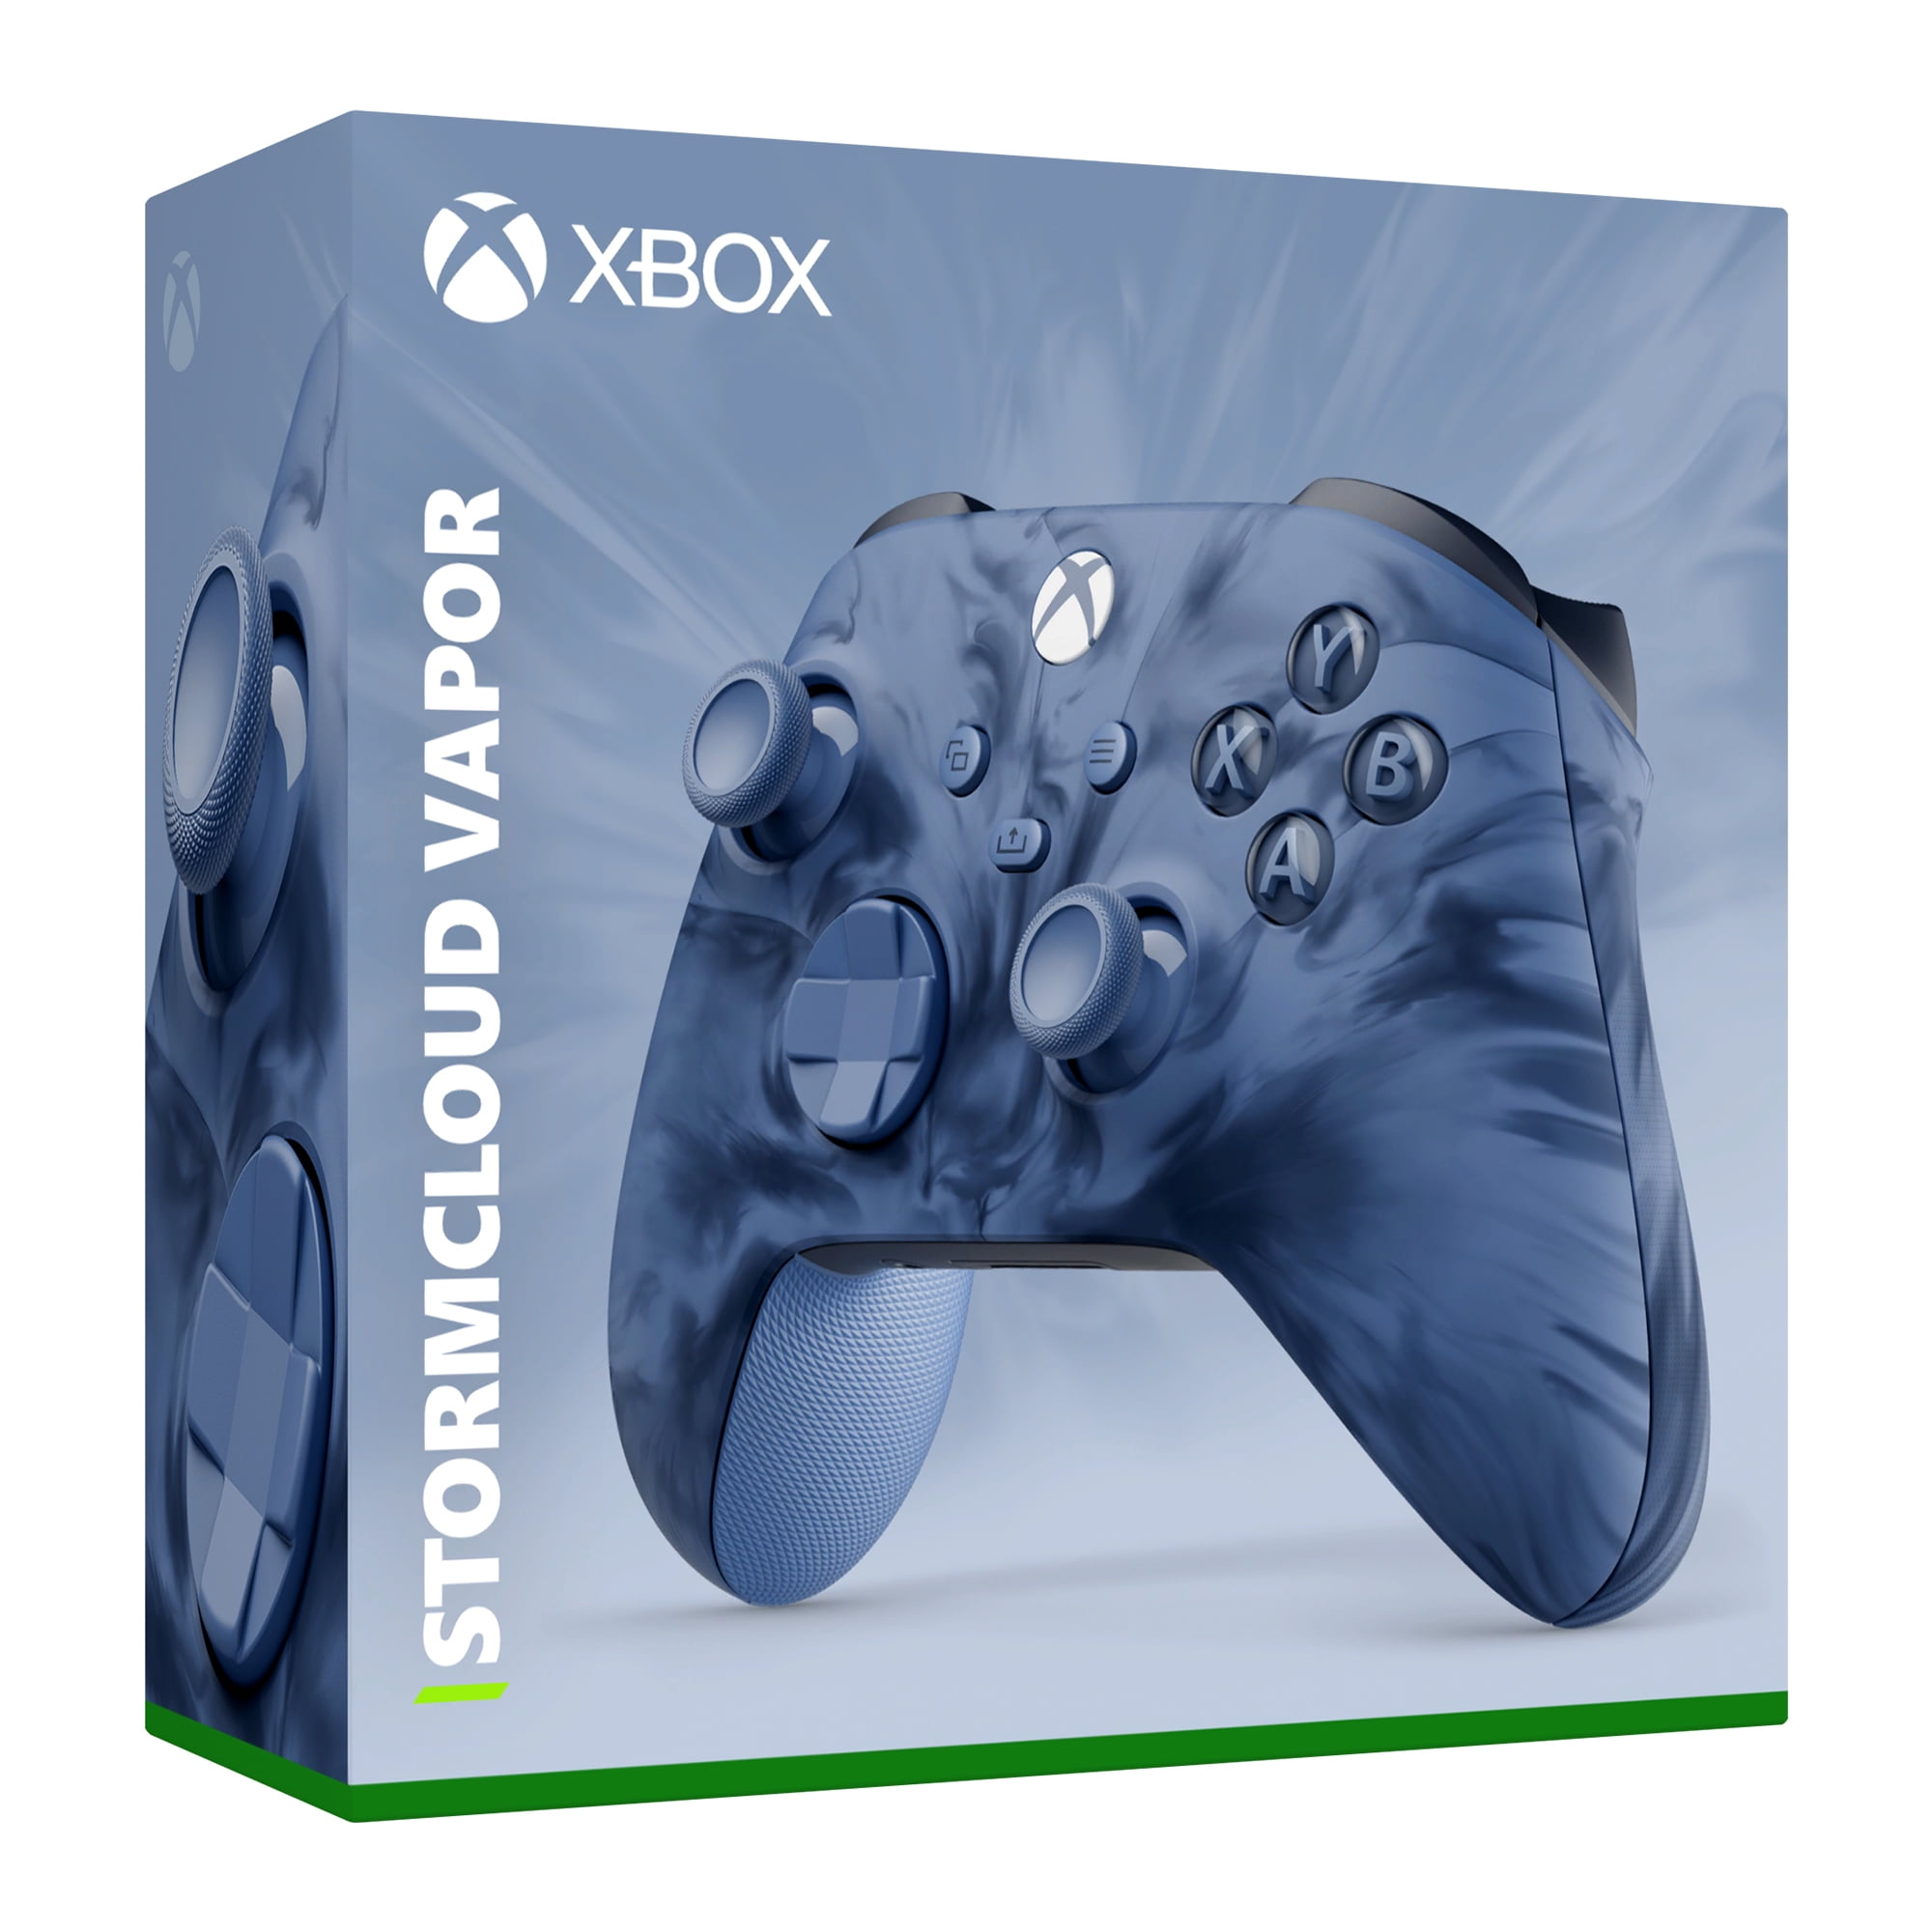 Electric Volt Xbox Controller is Down to $39.99 - IGN